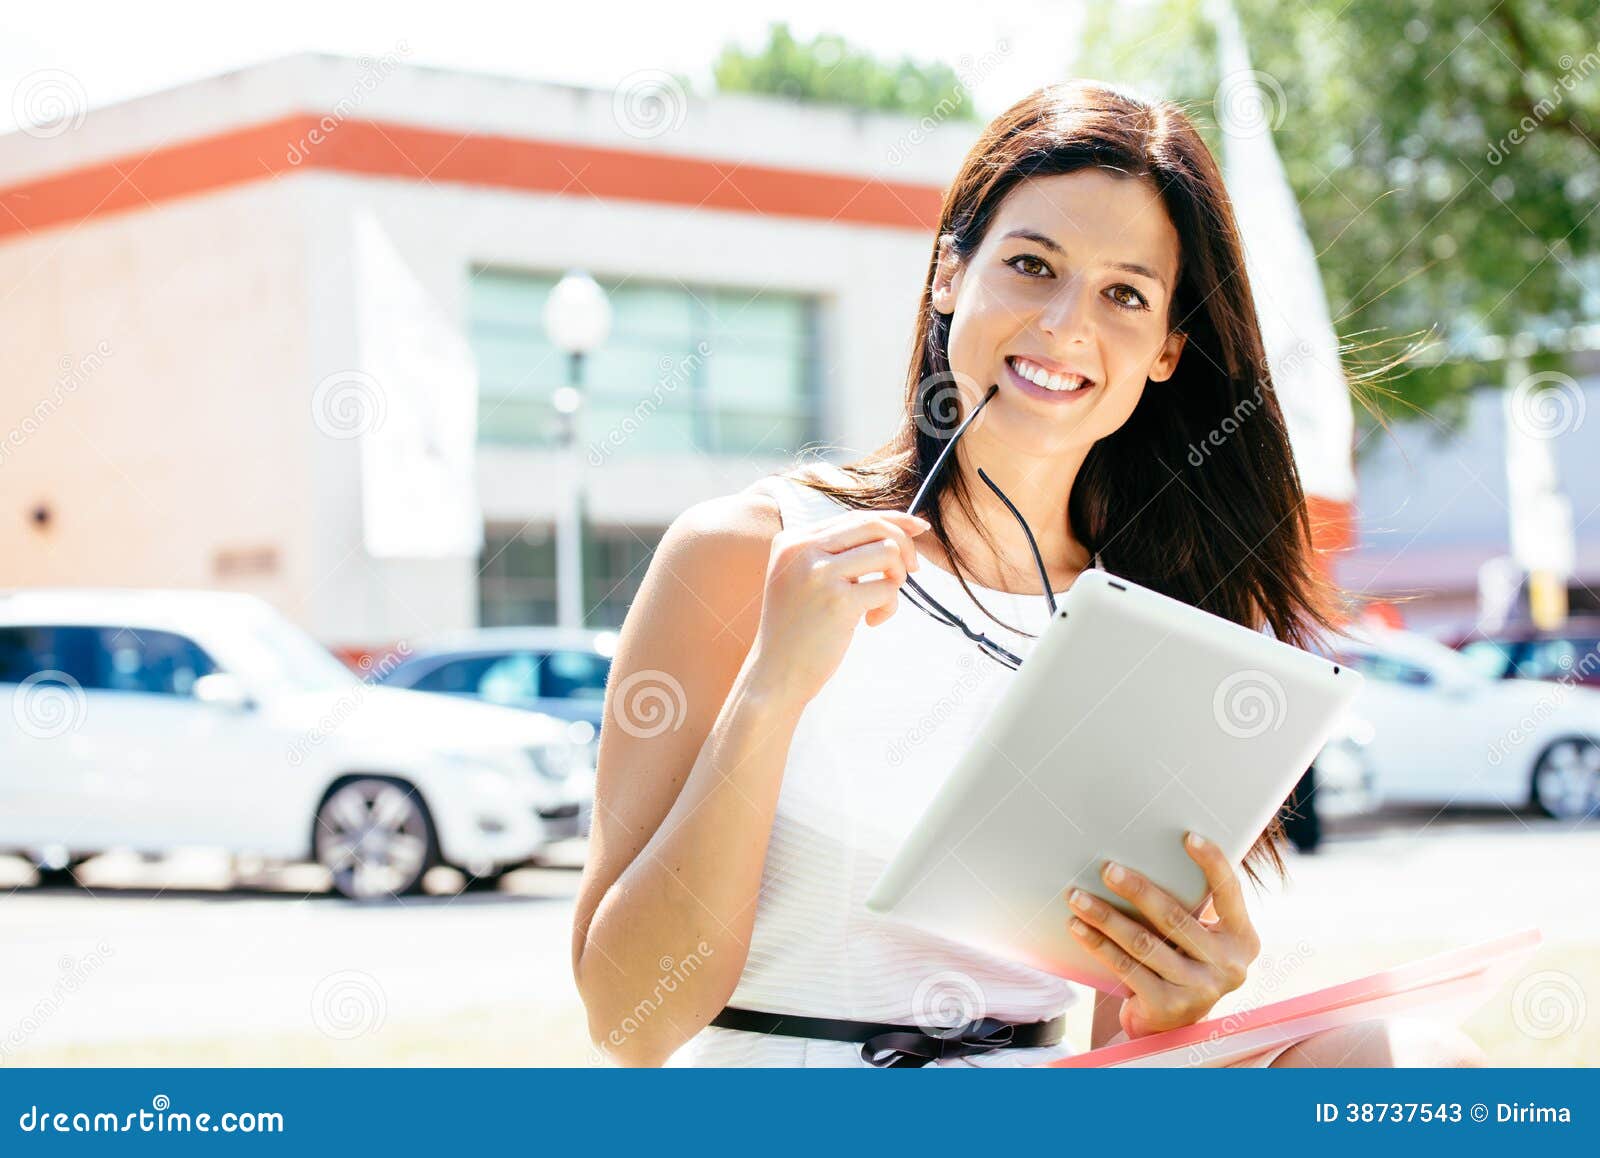 Car Sales Woman With Tablet In Trade Show Stock Photos - Image: 38737543